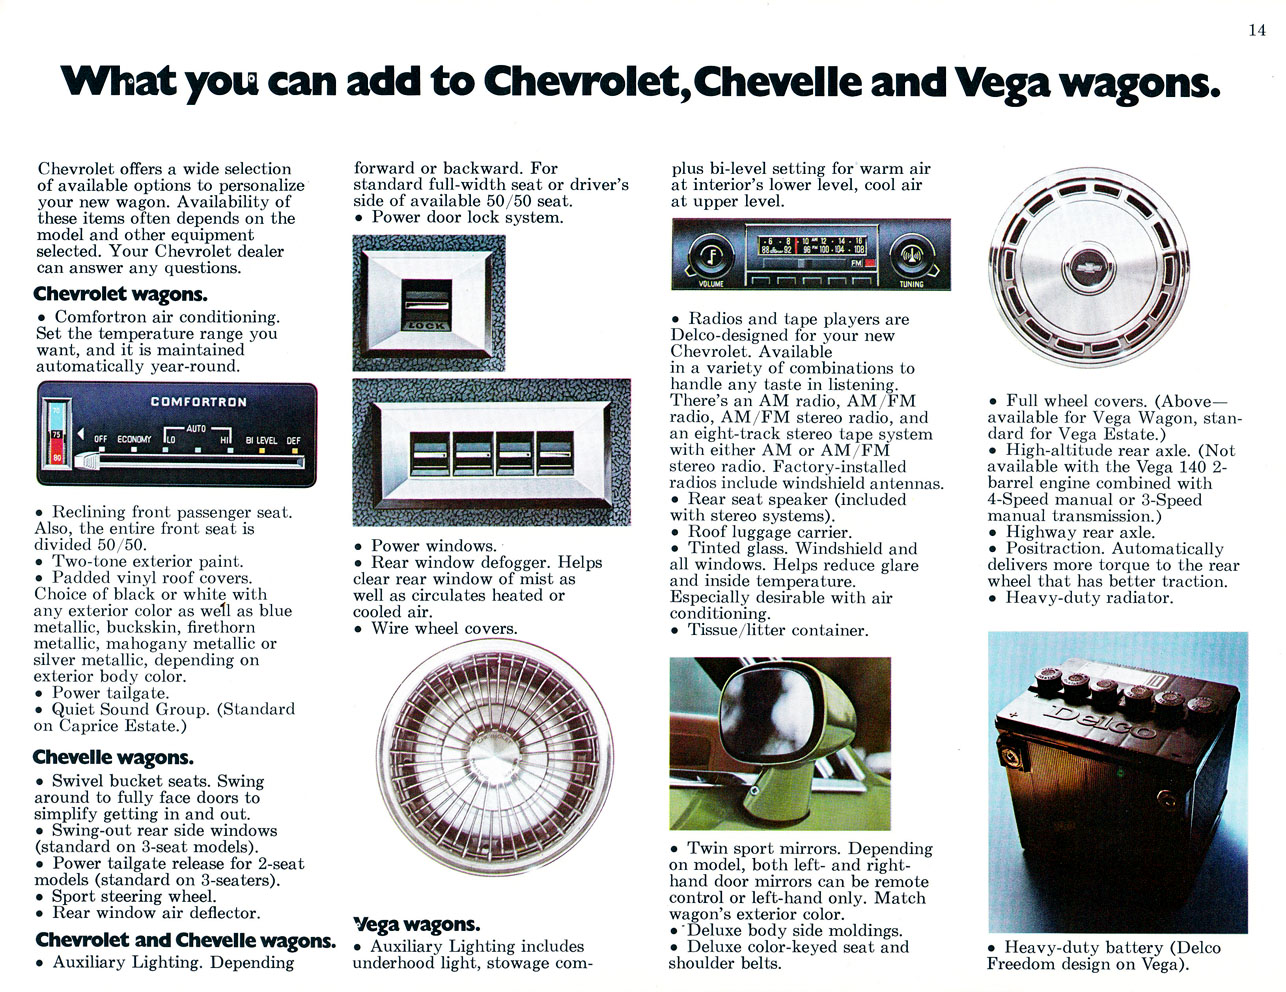 1976 Chevrolet Wagons Brochure Page 15